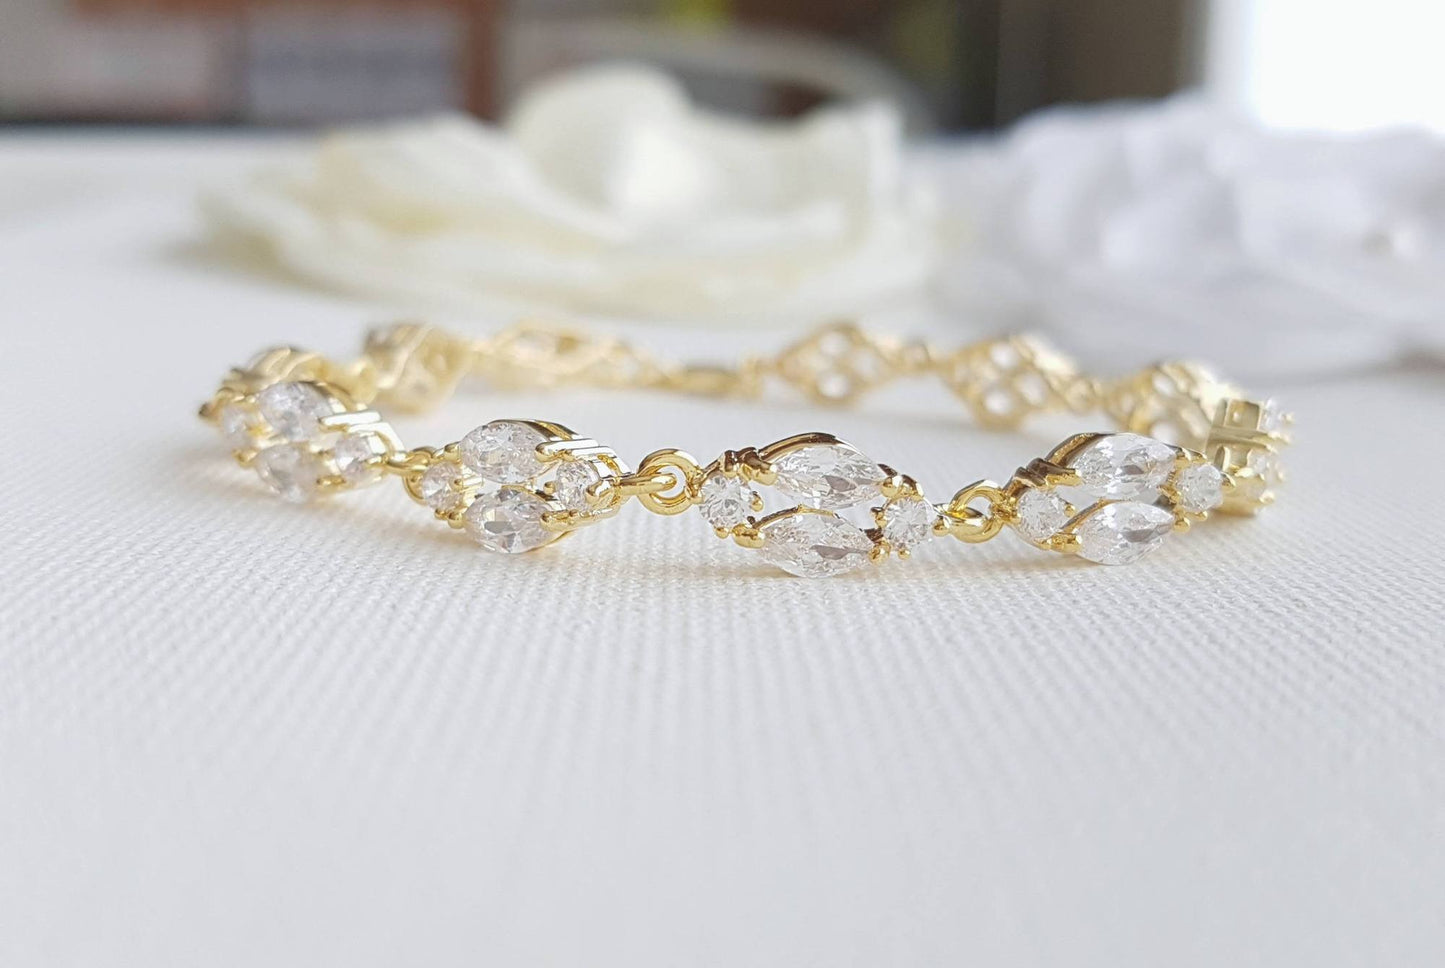 Dainty Rose Gold Crystal Bracelet for Weddings and Brides-Hayley - PoetryDesigns